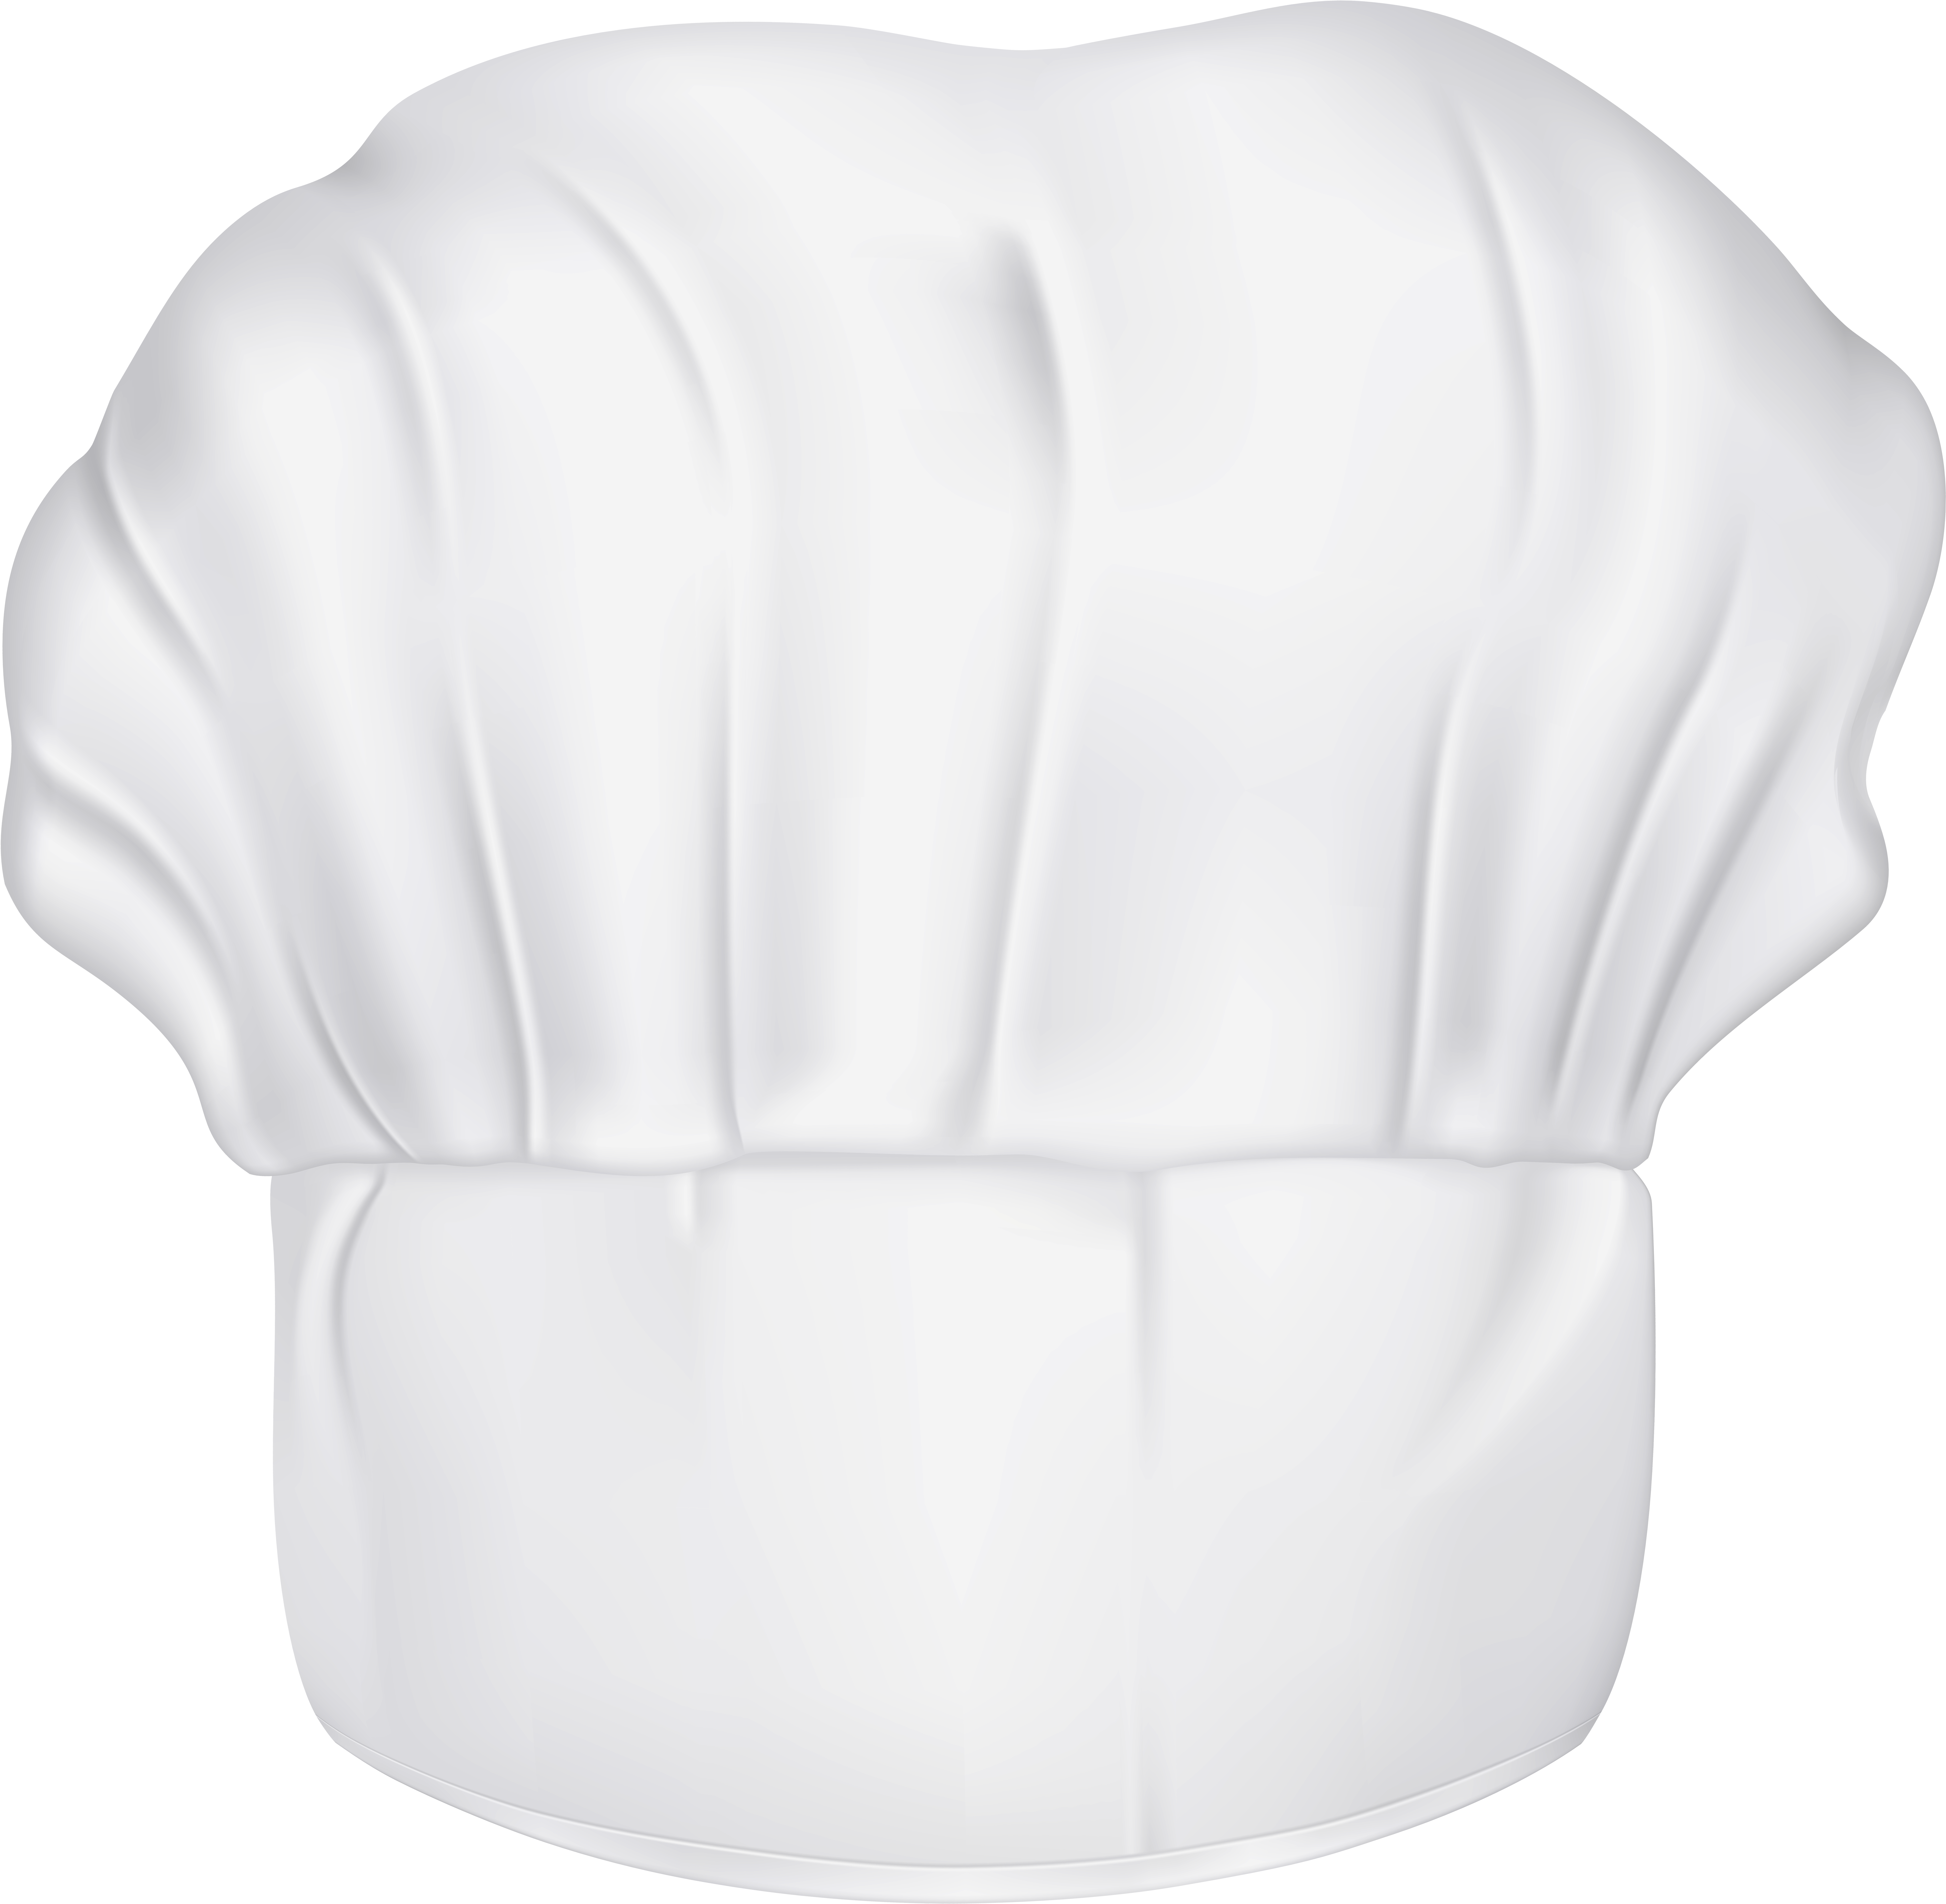 chef hat, background, illustration high quality png images